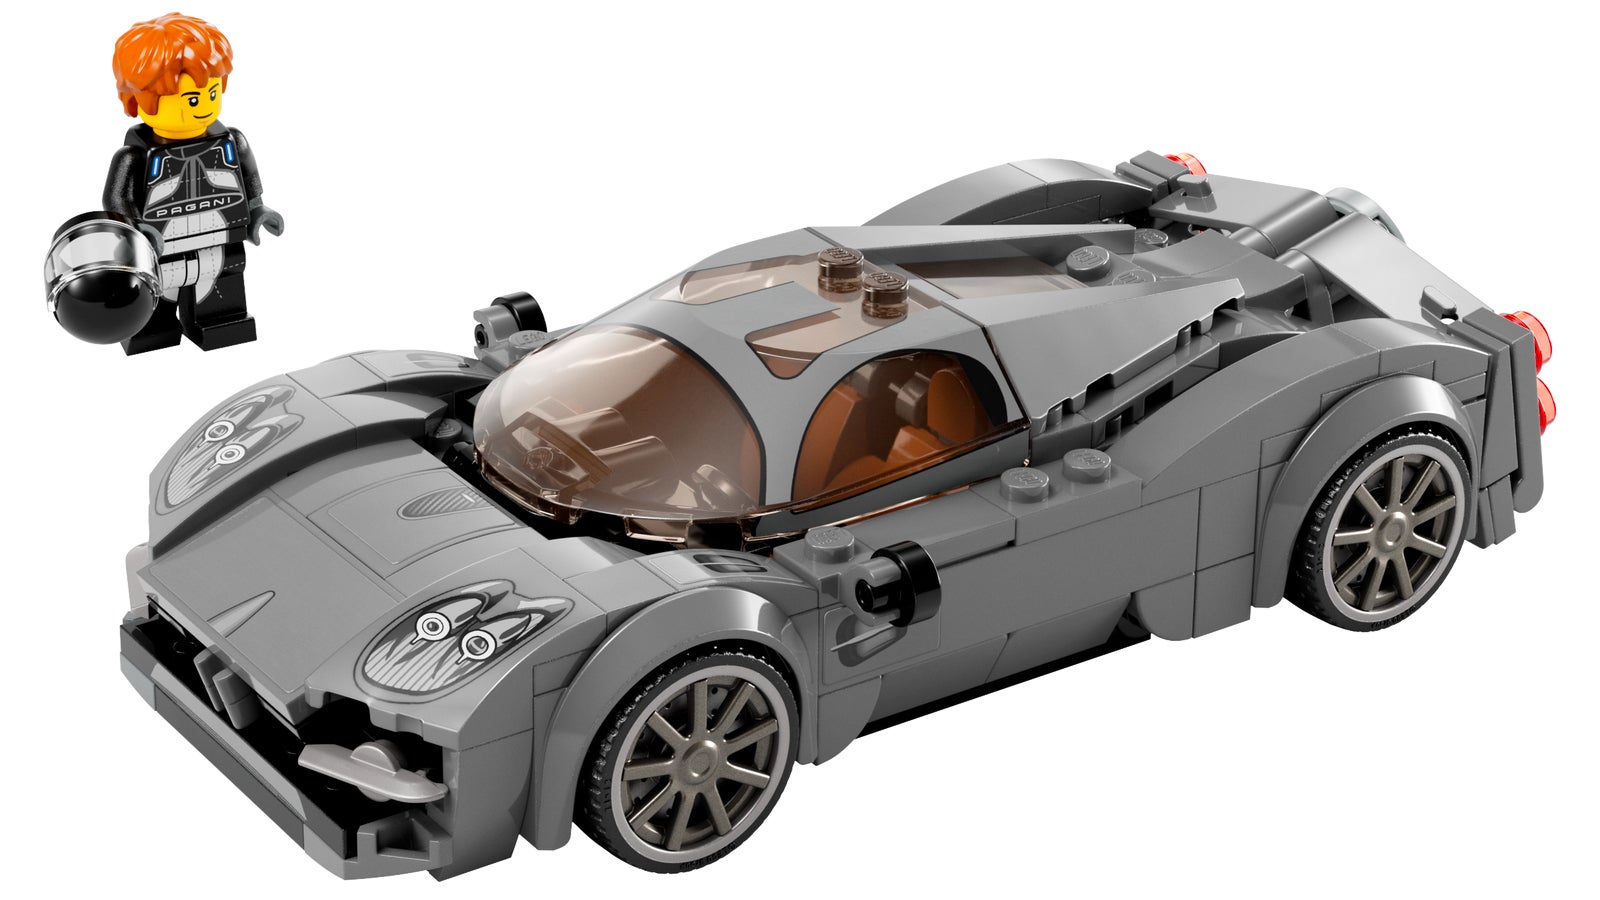 Brace Your Wallet For the Best LEGO Sets You Can Finally Buy in March